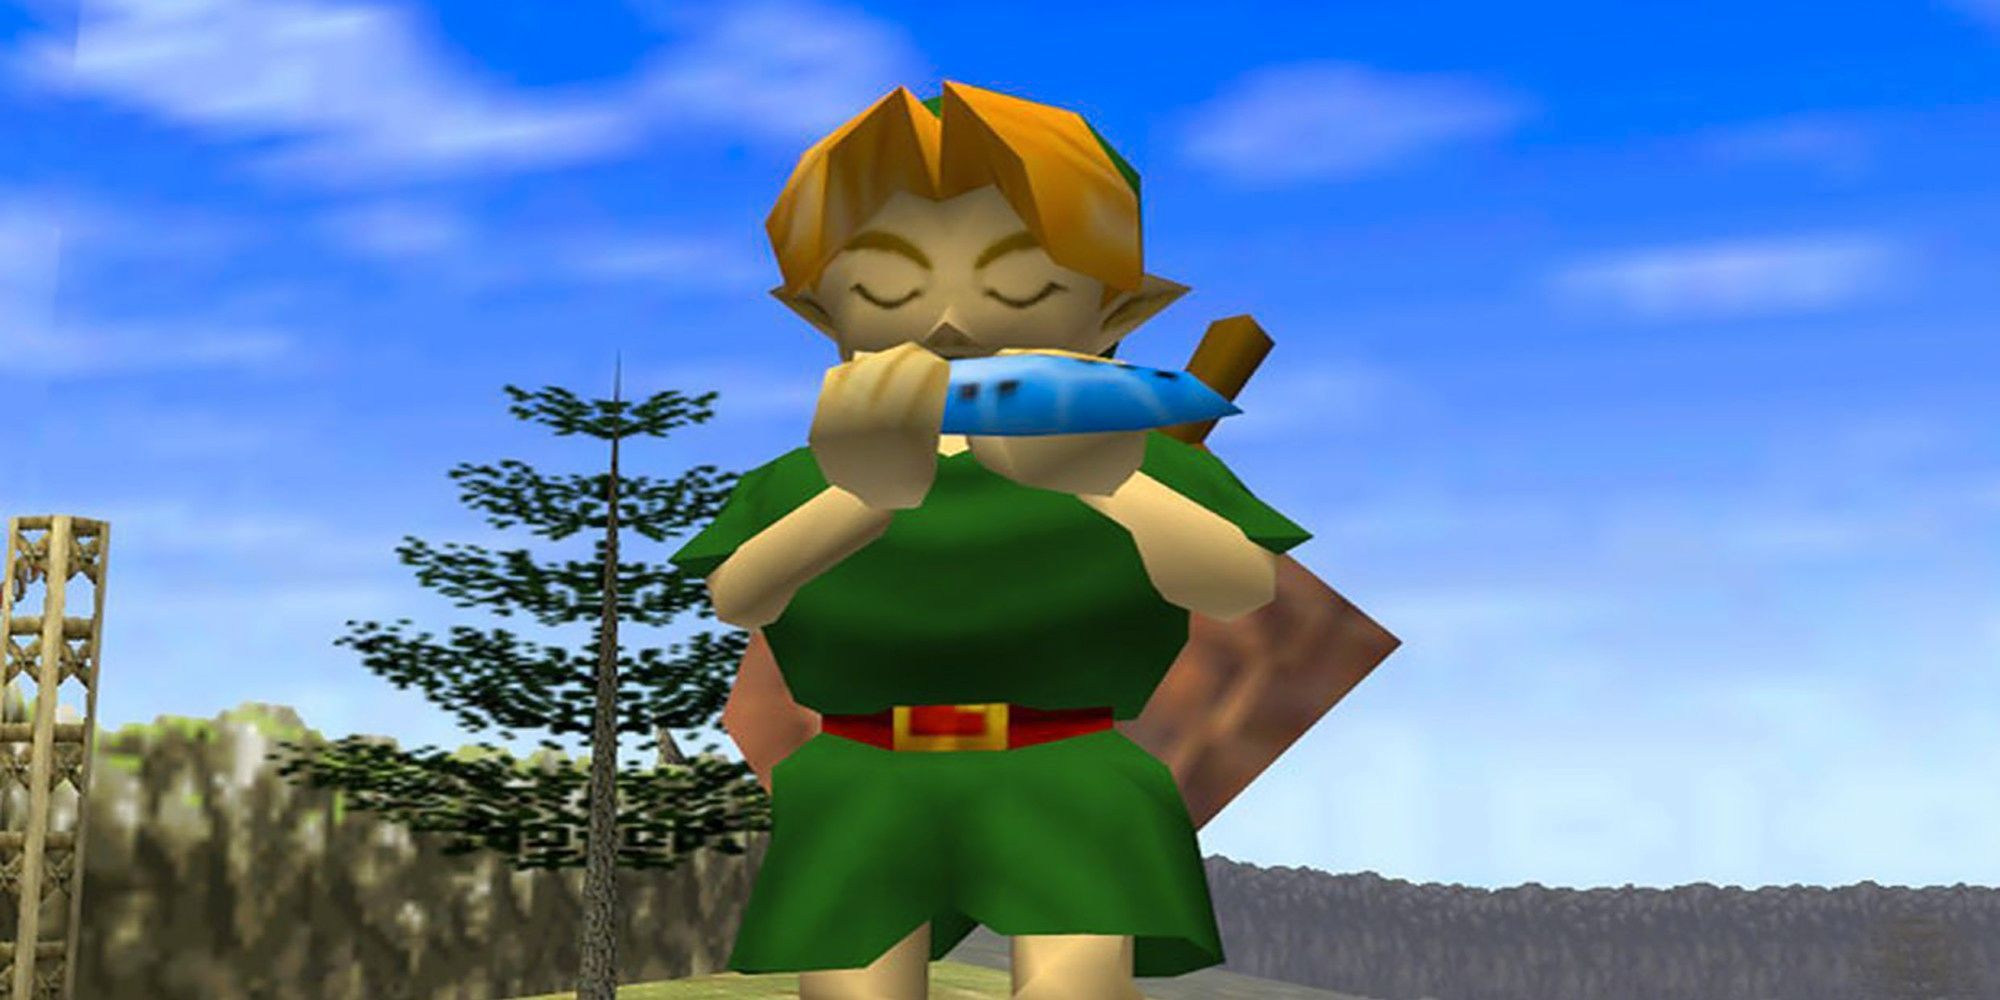 Link playing his magical musical instrument in The Legend of Zelda: Ocarina of Time